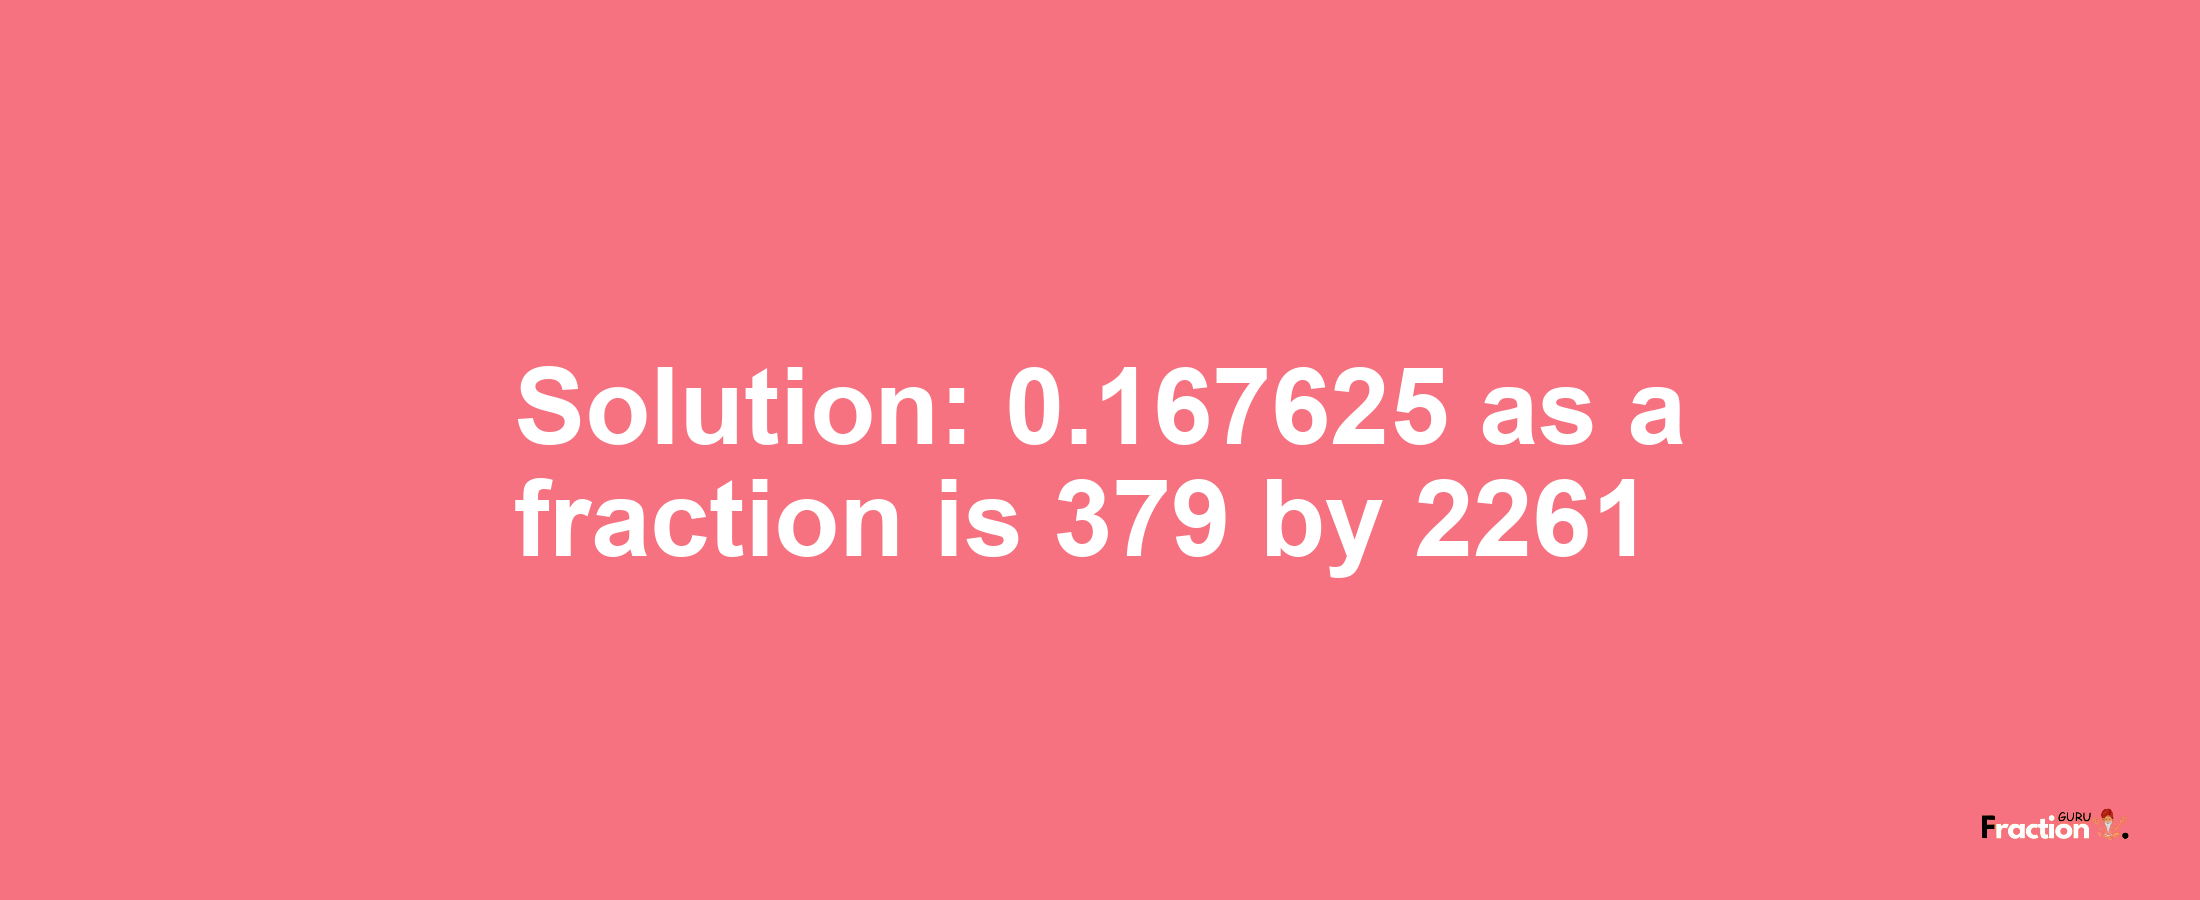 Solution:0.167625 as a fraction is 379/2261